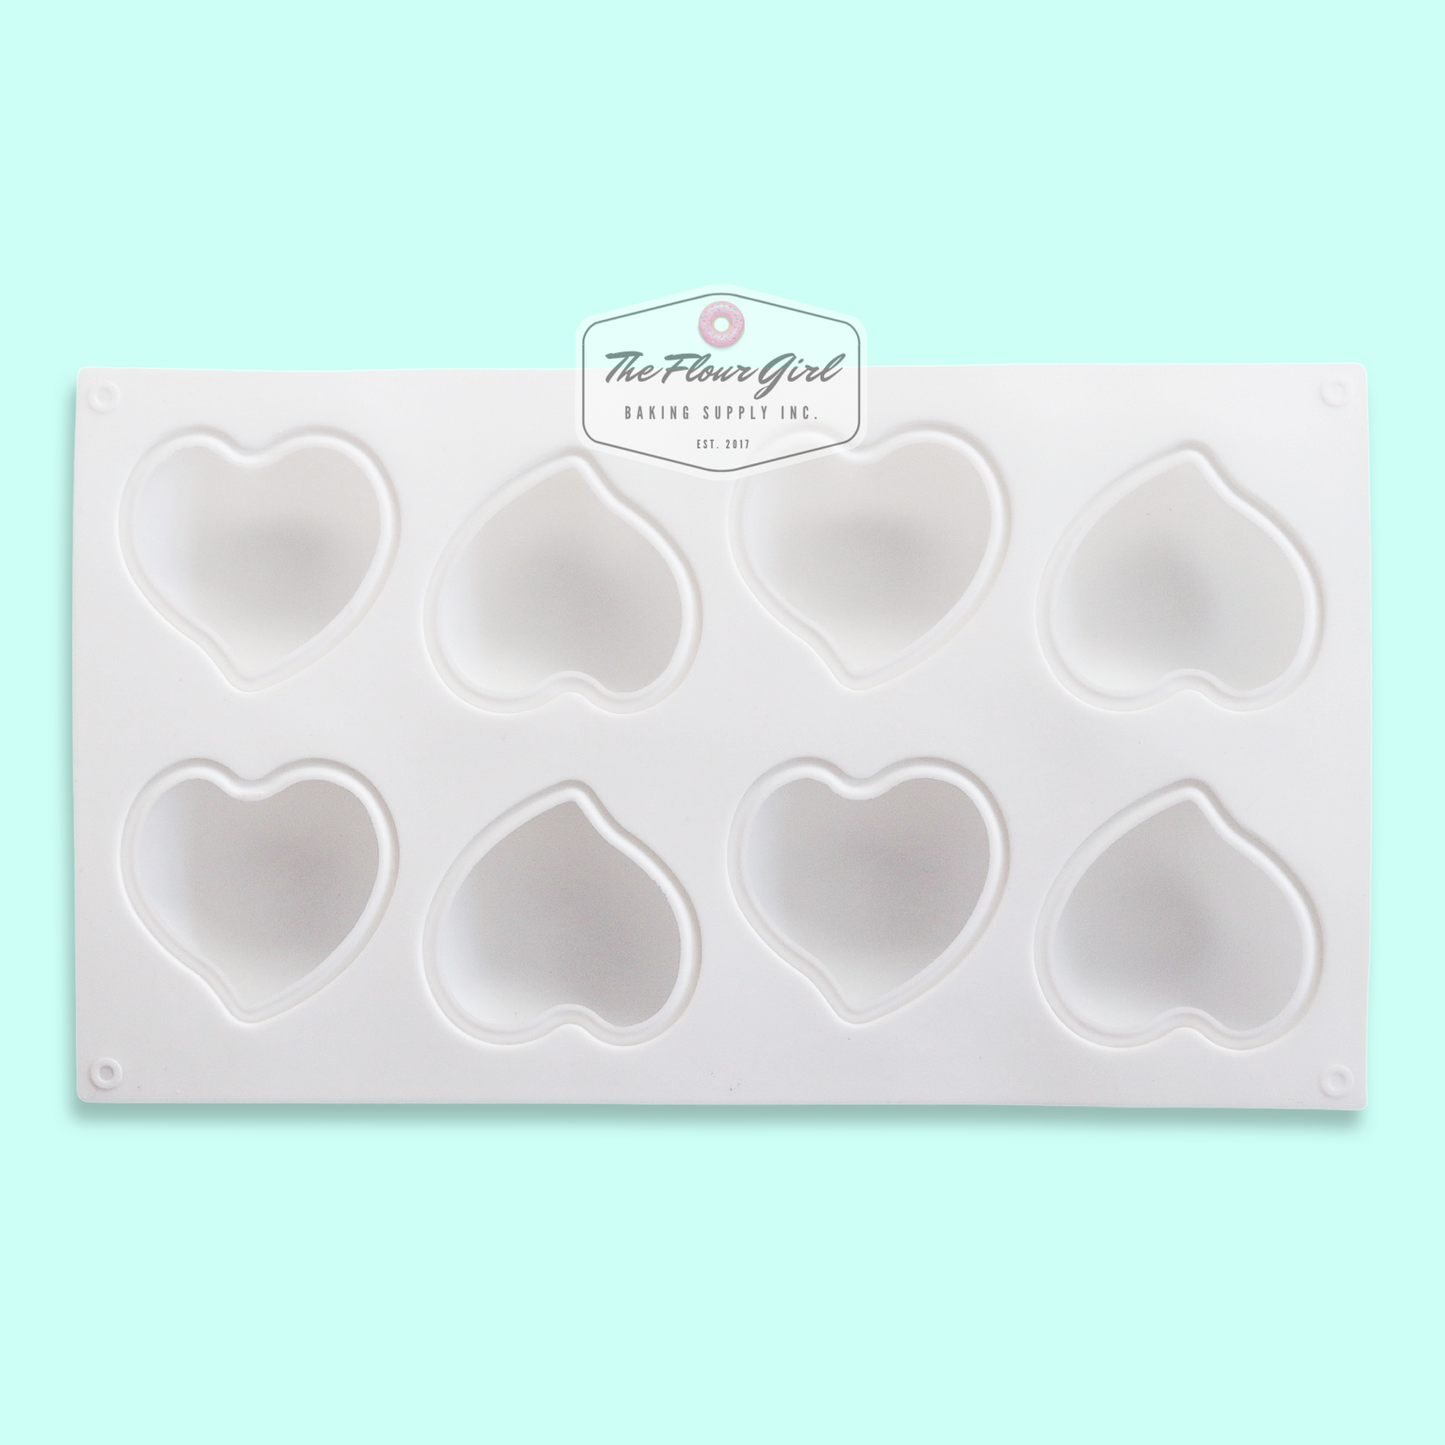 3D 8-Cavity Silicone Heart Mold